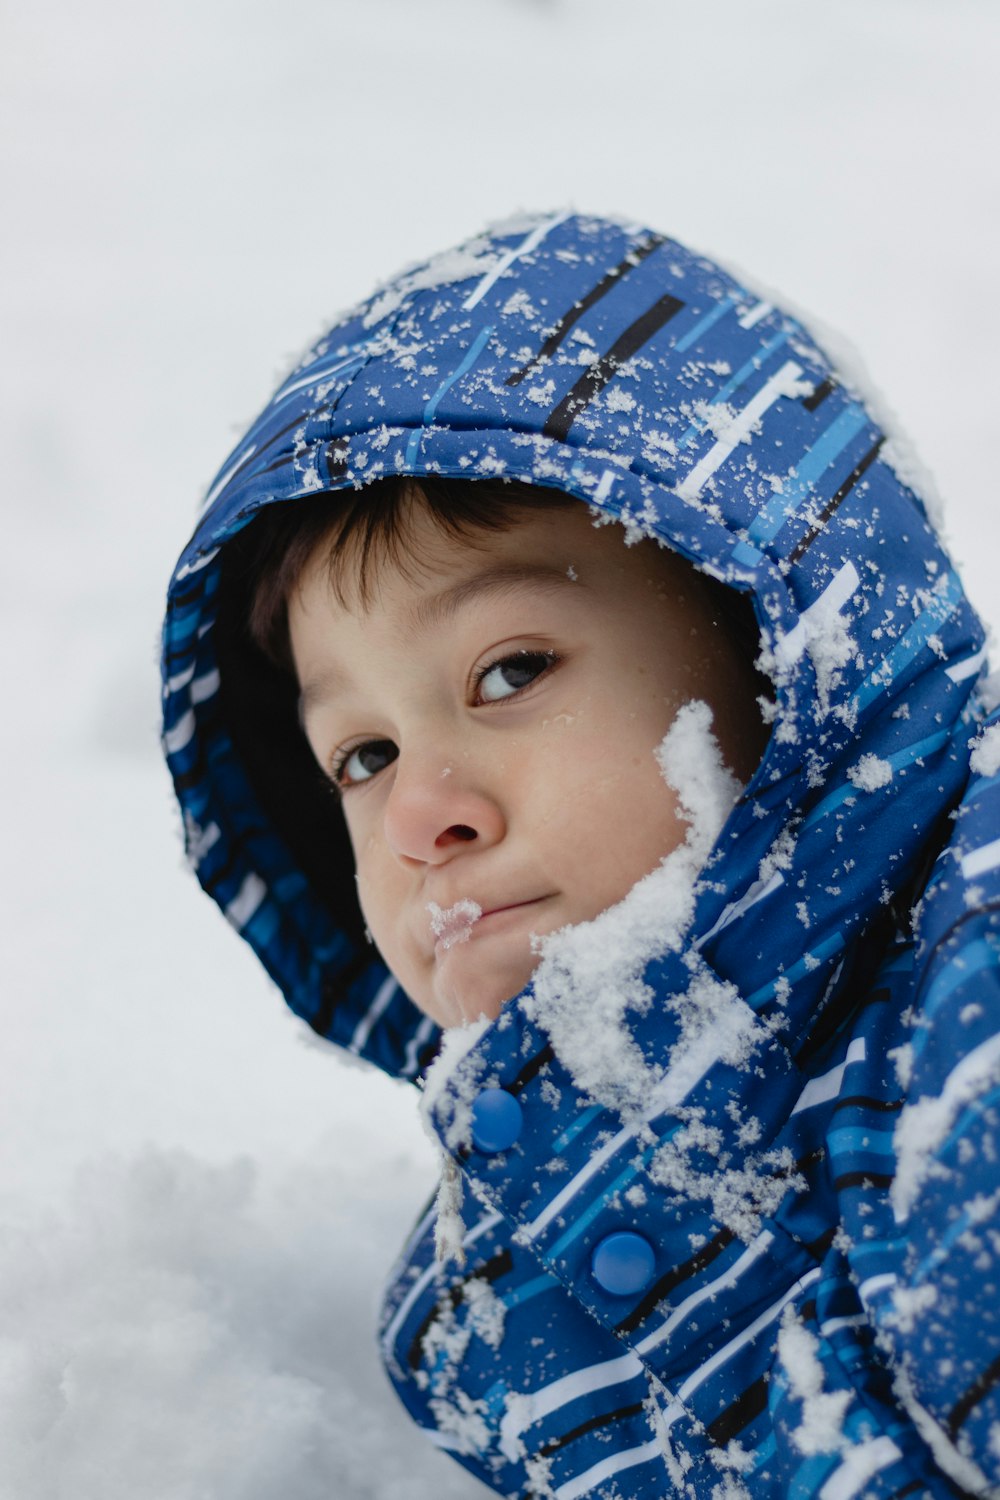 a small child wearing a blue jacket in the snow